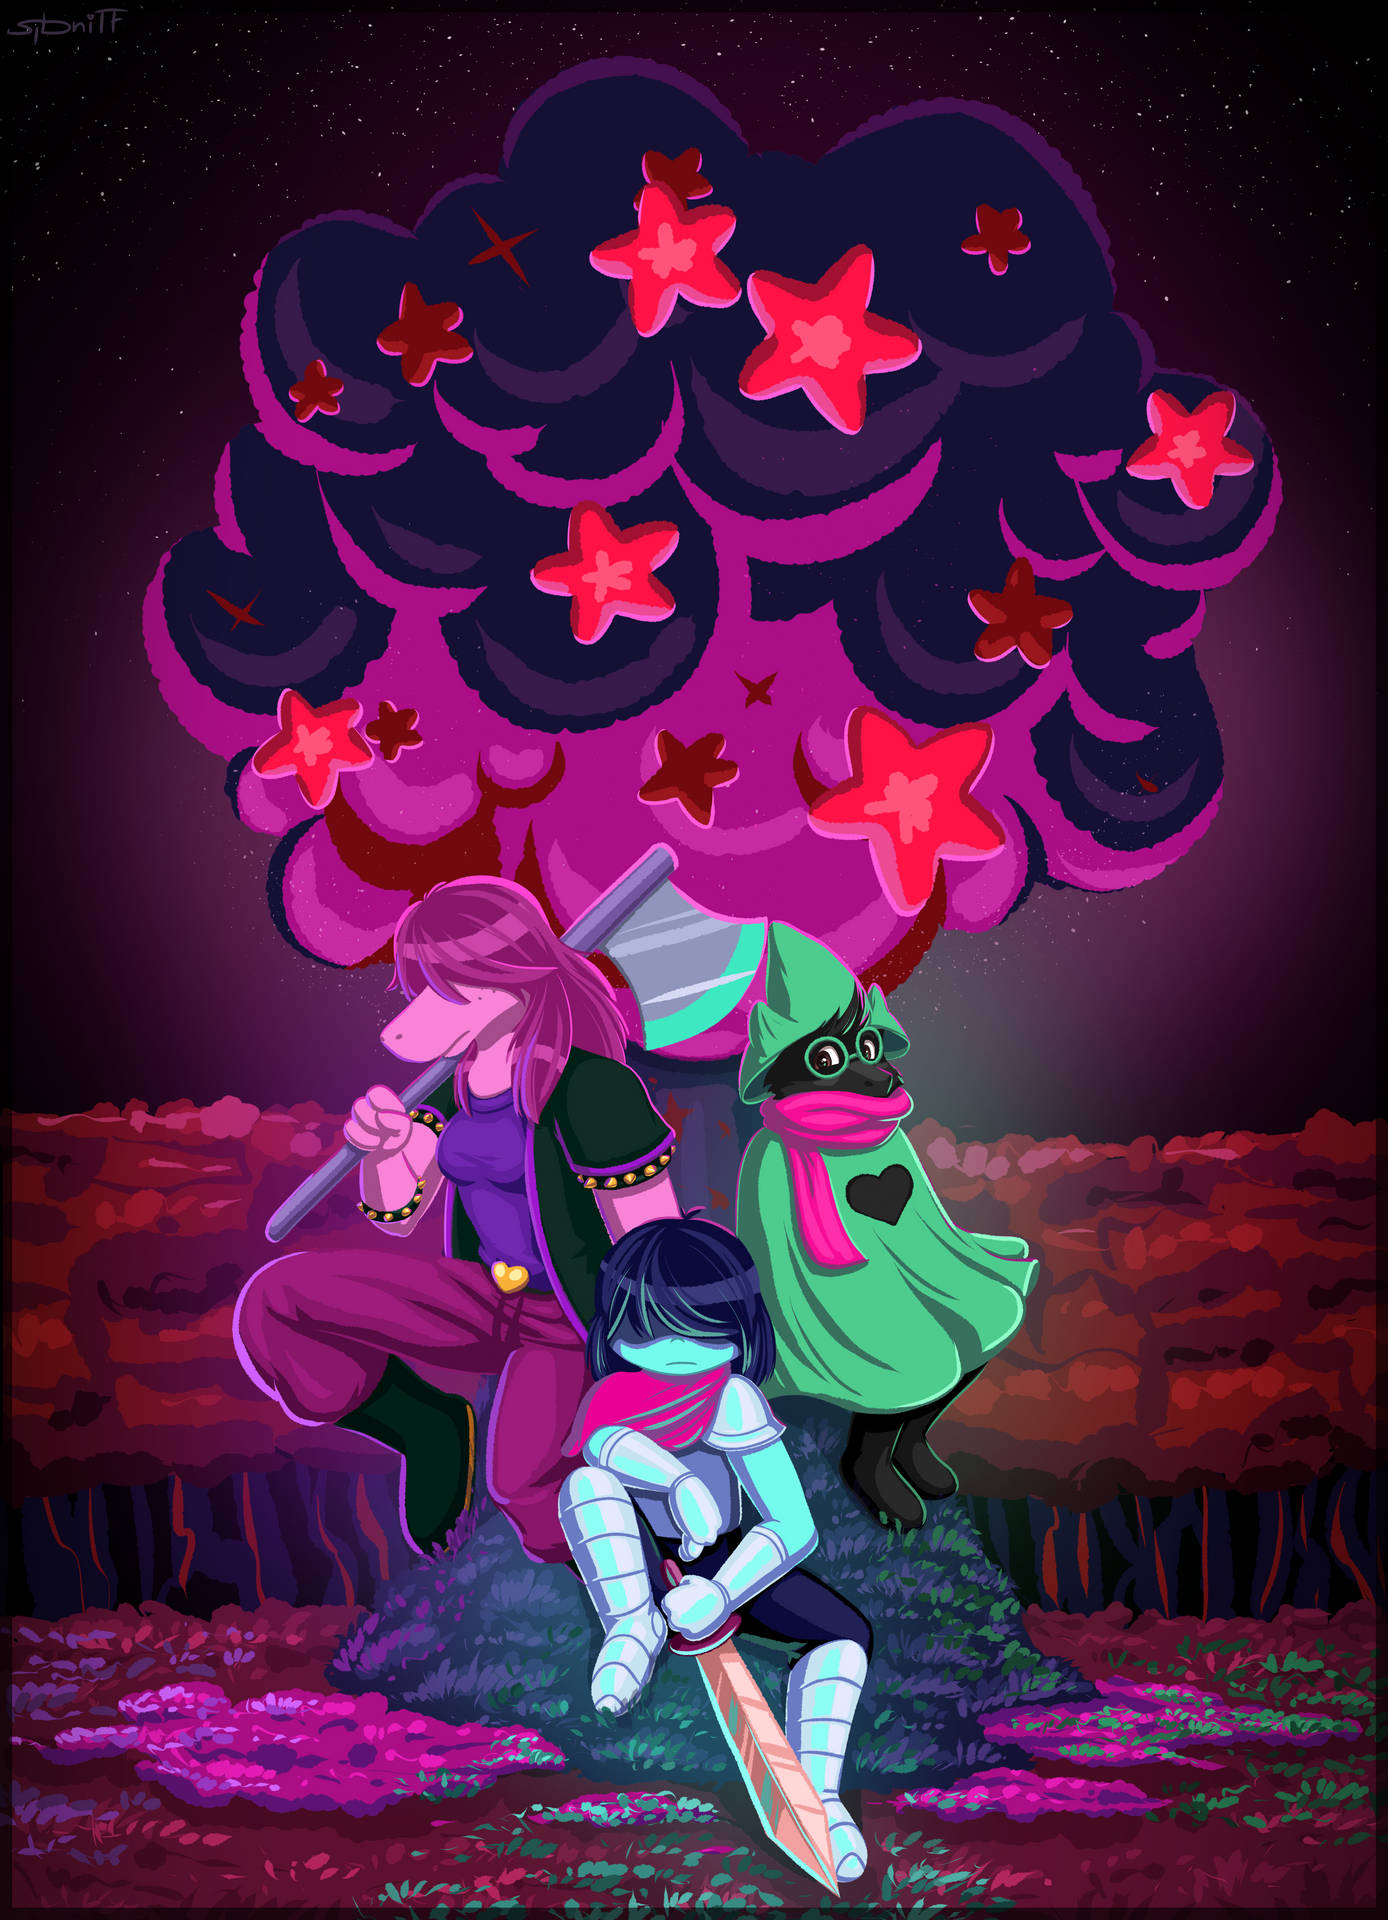 Kris, Susie and Ralsei from Deltarune in a night sky Wallpaper